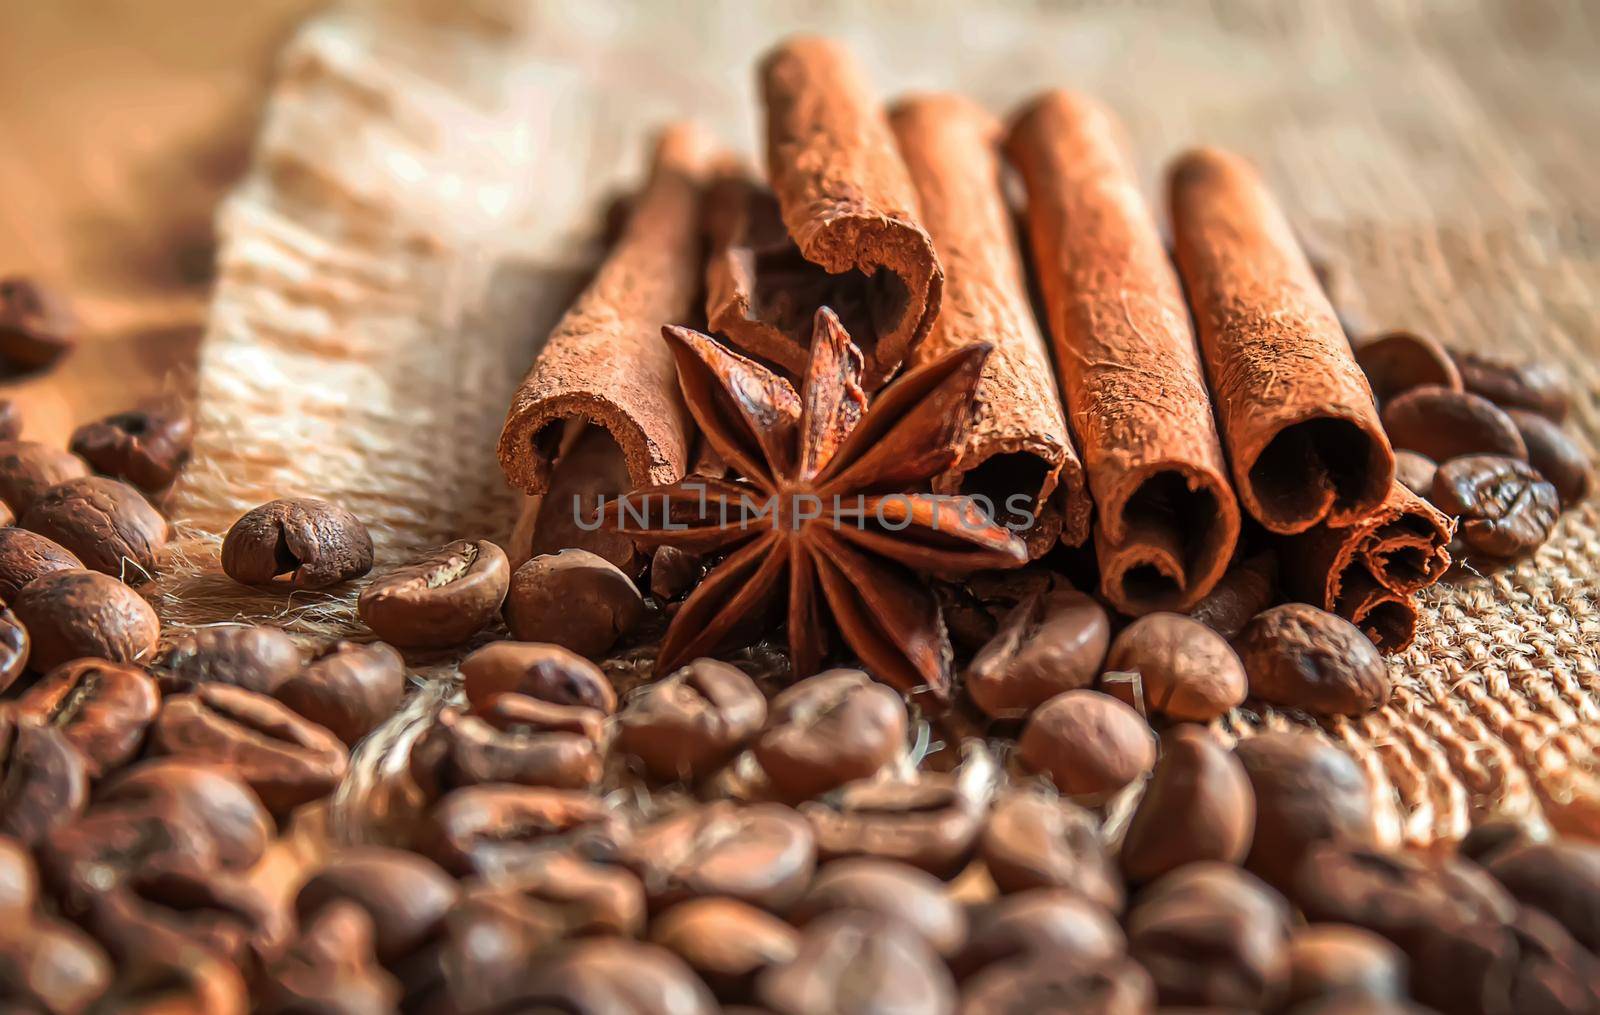 Anise stars and cinnamon on roasted coffee beans.selectiv focus by mila1784